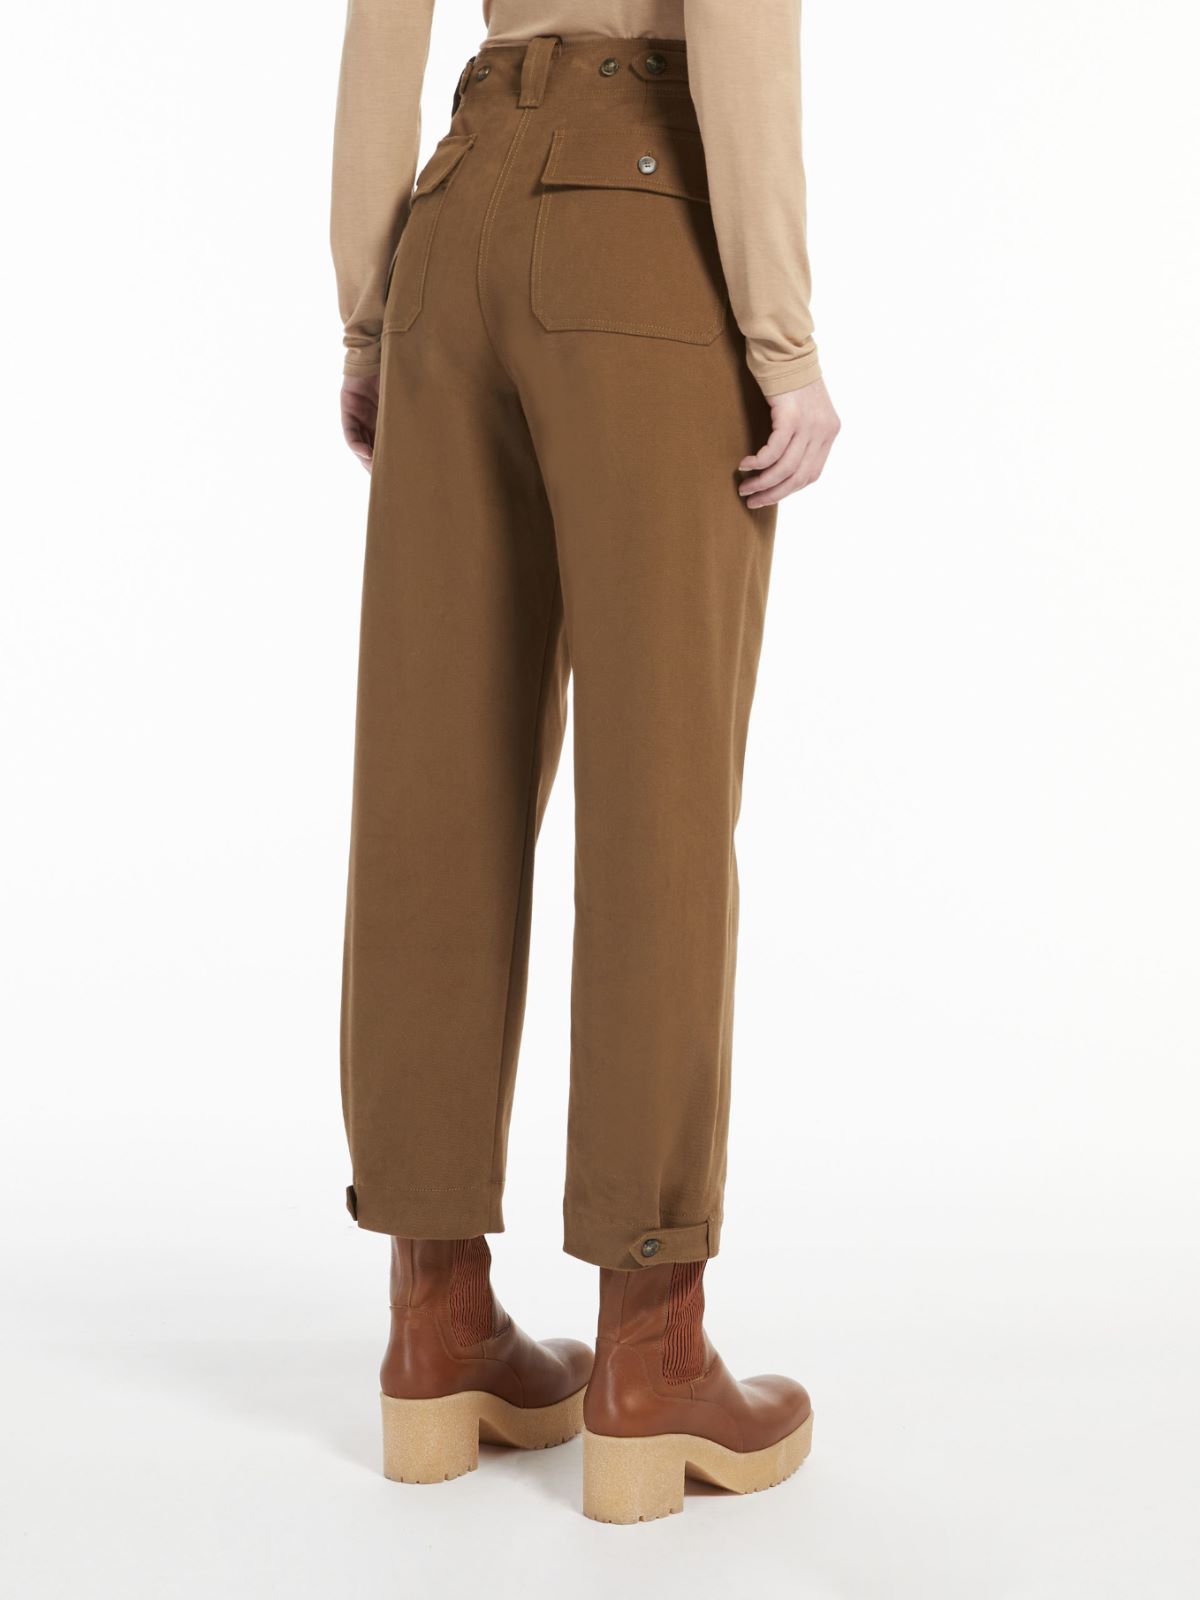 Cotton drill trousers - TOBACCO - Weekend Max Mara - 3